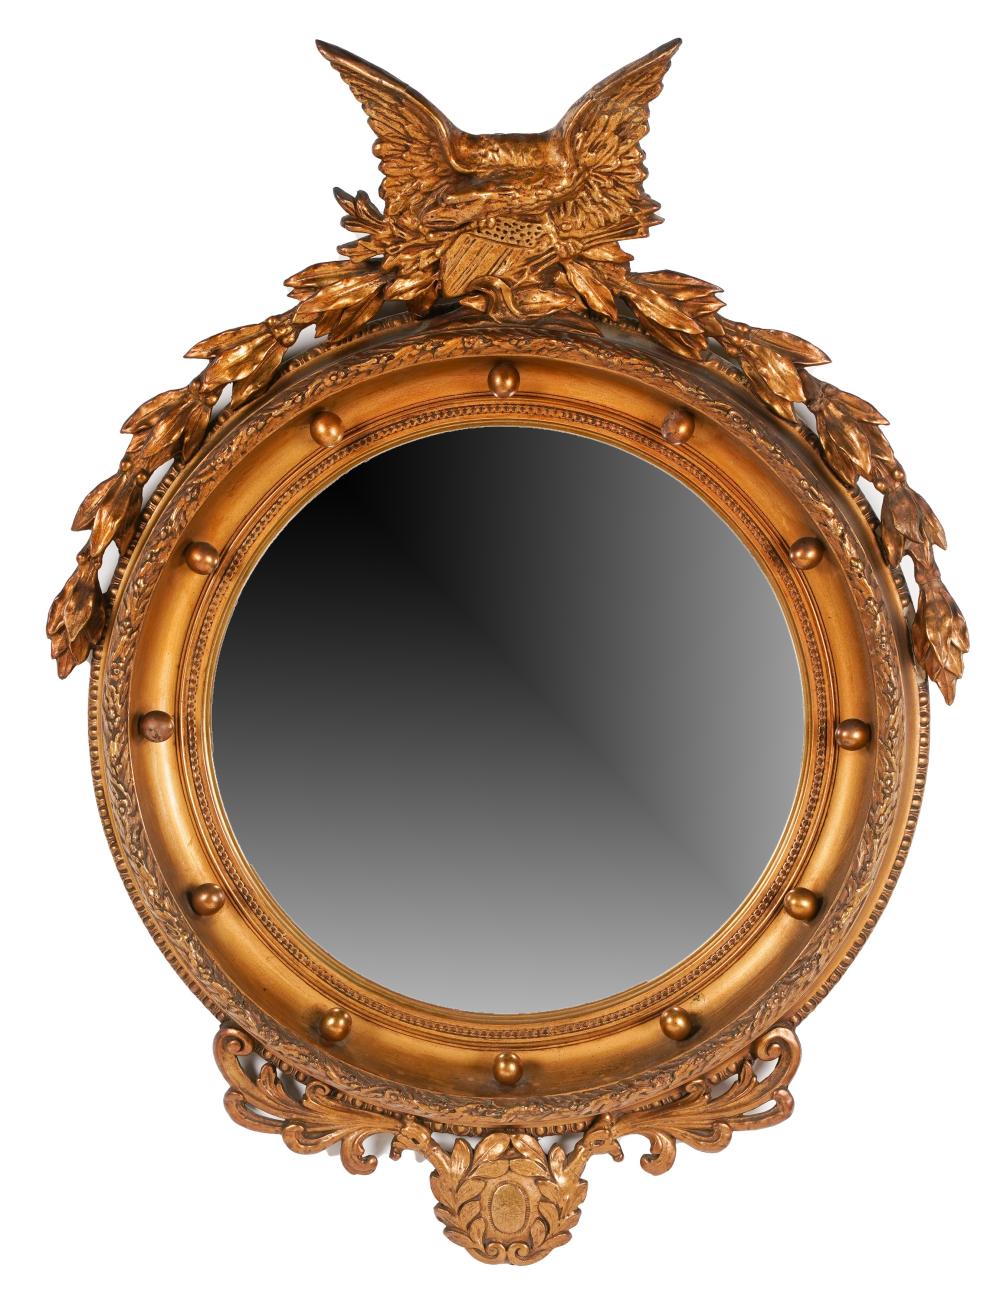 FEDERAL STYLE CARVED GILTWOOD CONVEX 3009d2